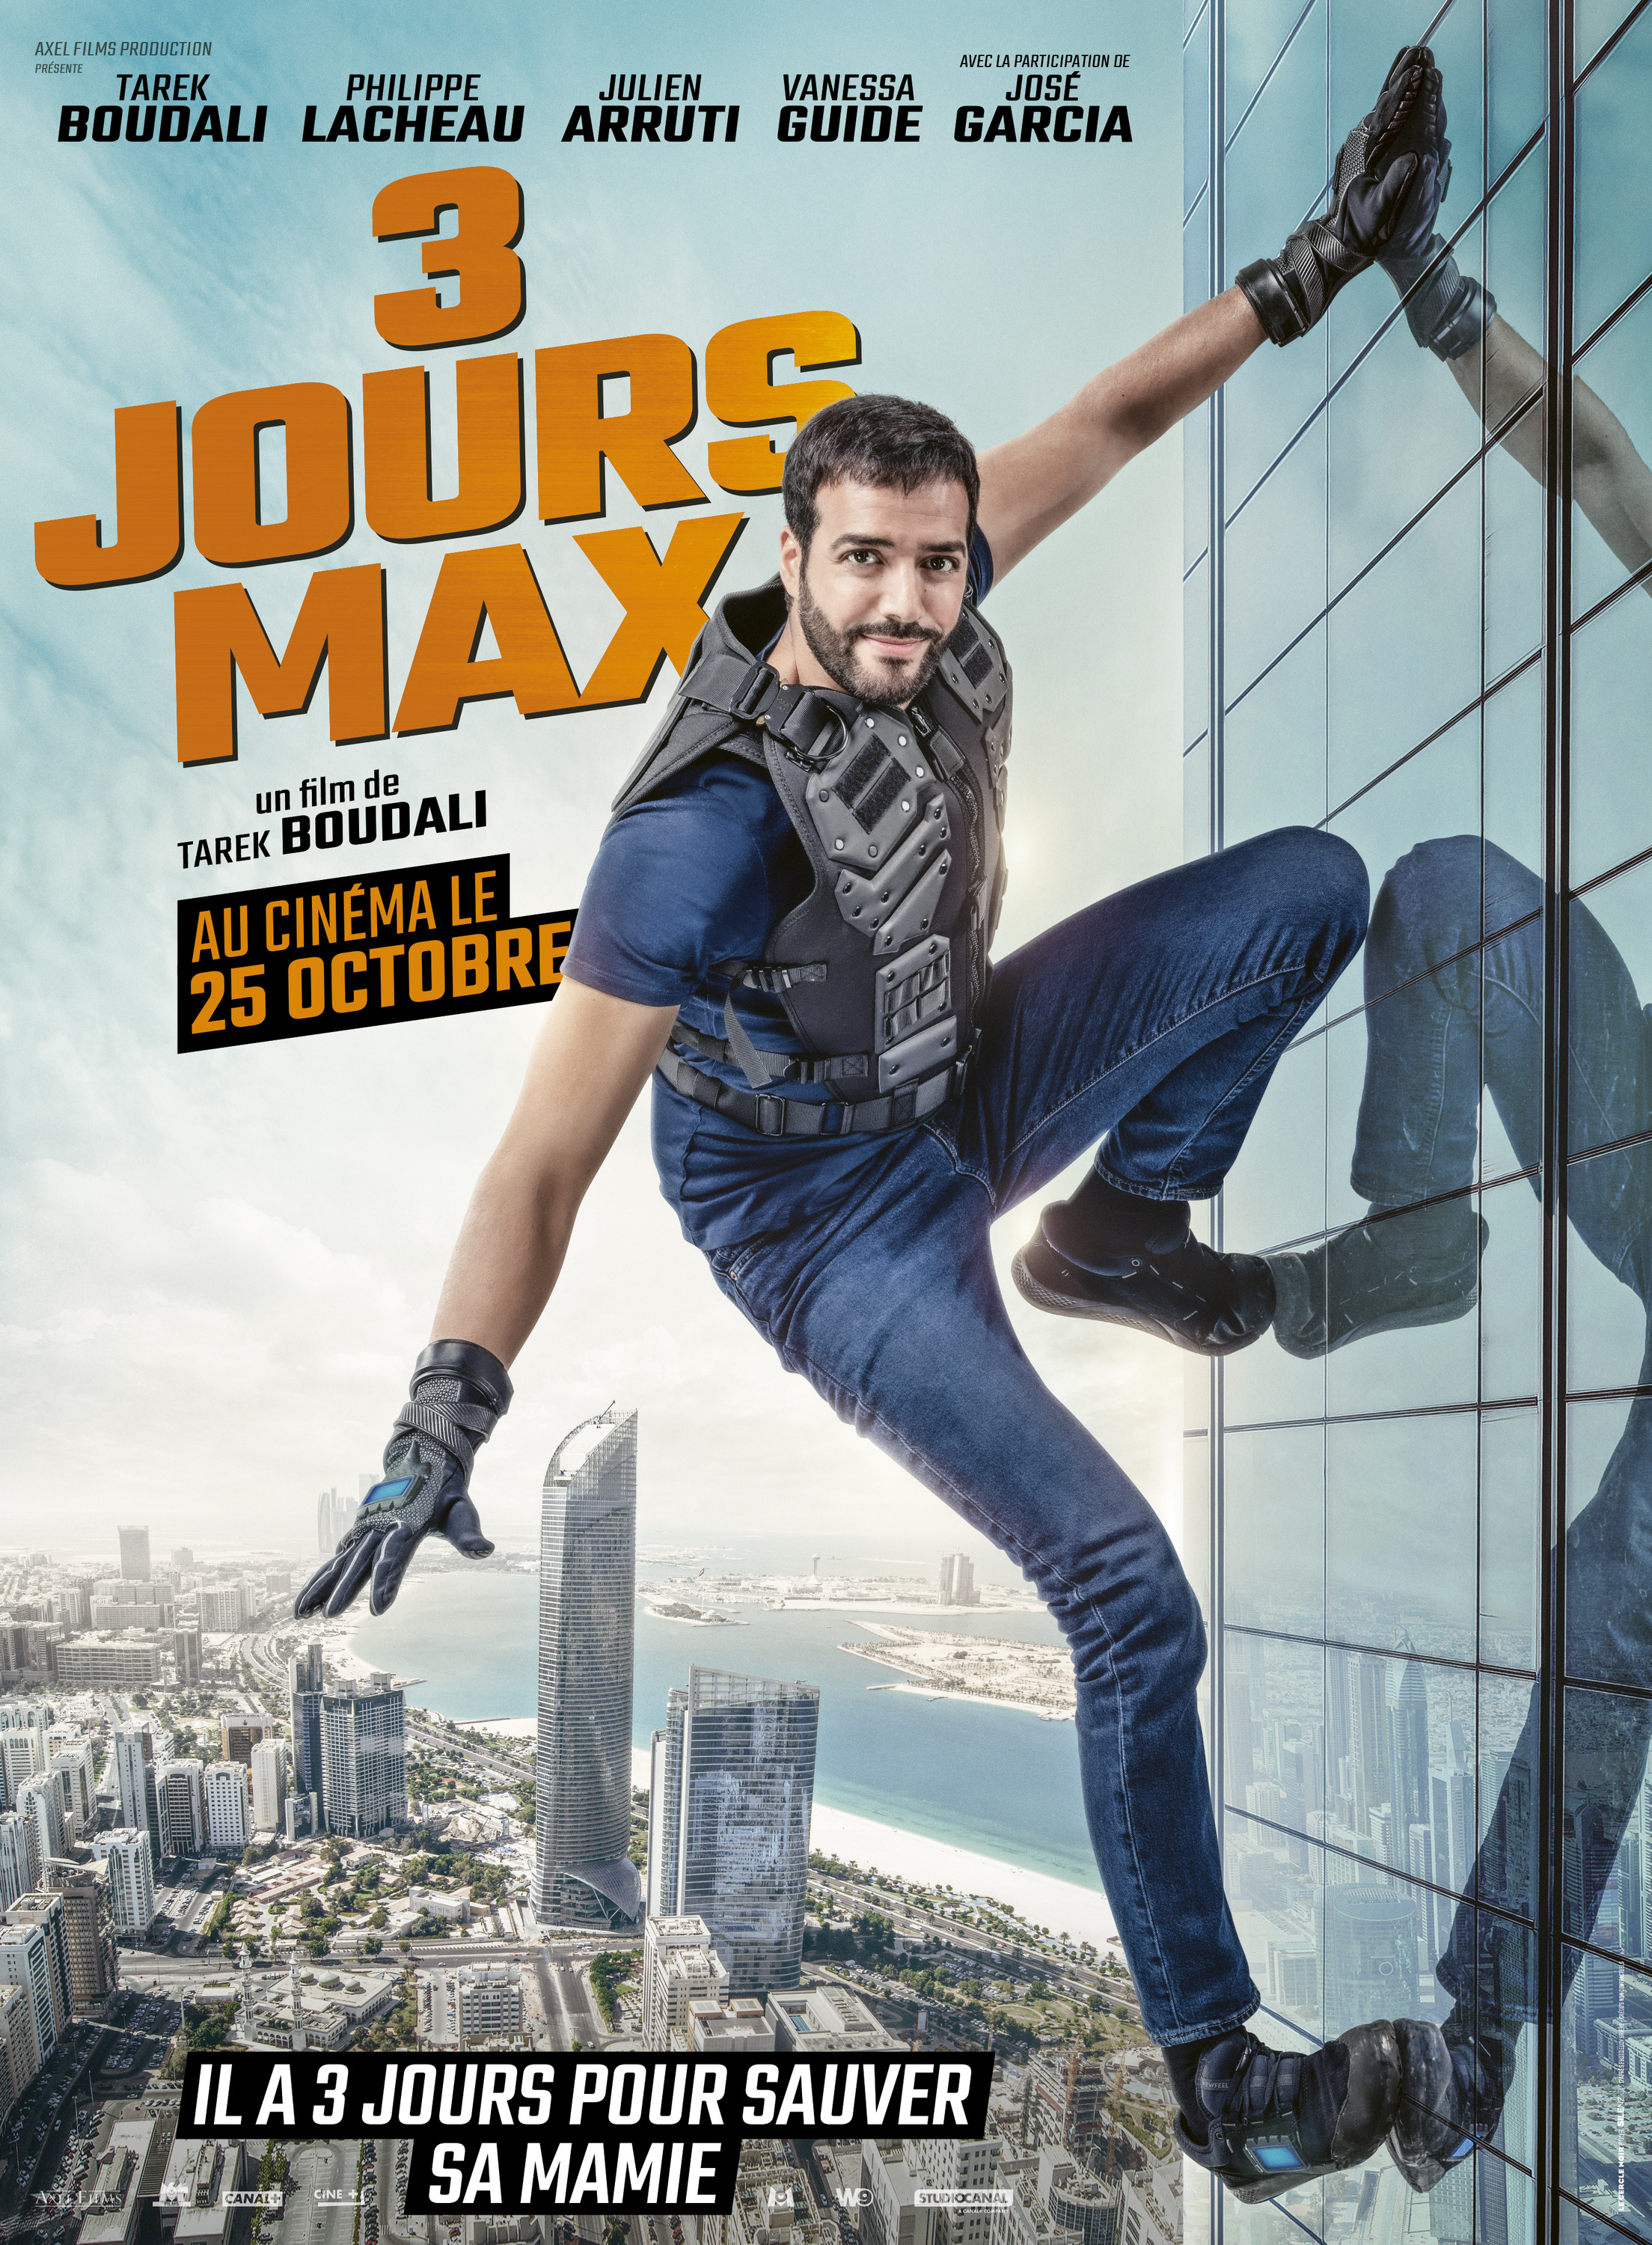 Mega Sized Movie Poster Image for 3 jours max (#1 of 2)